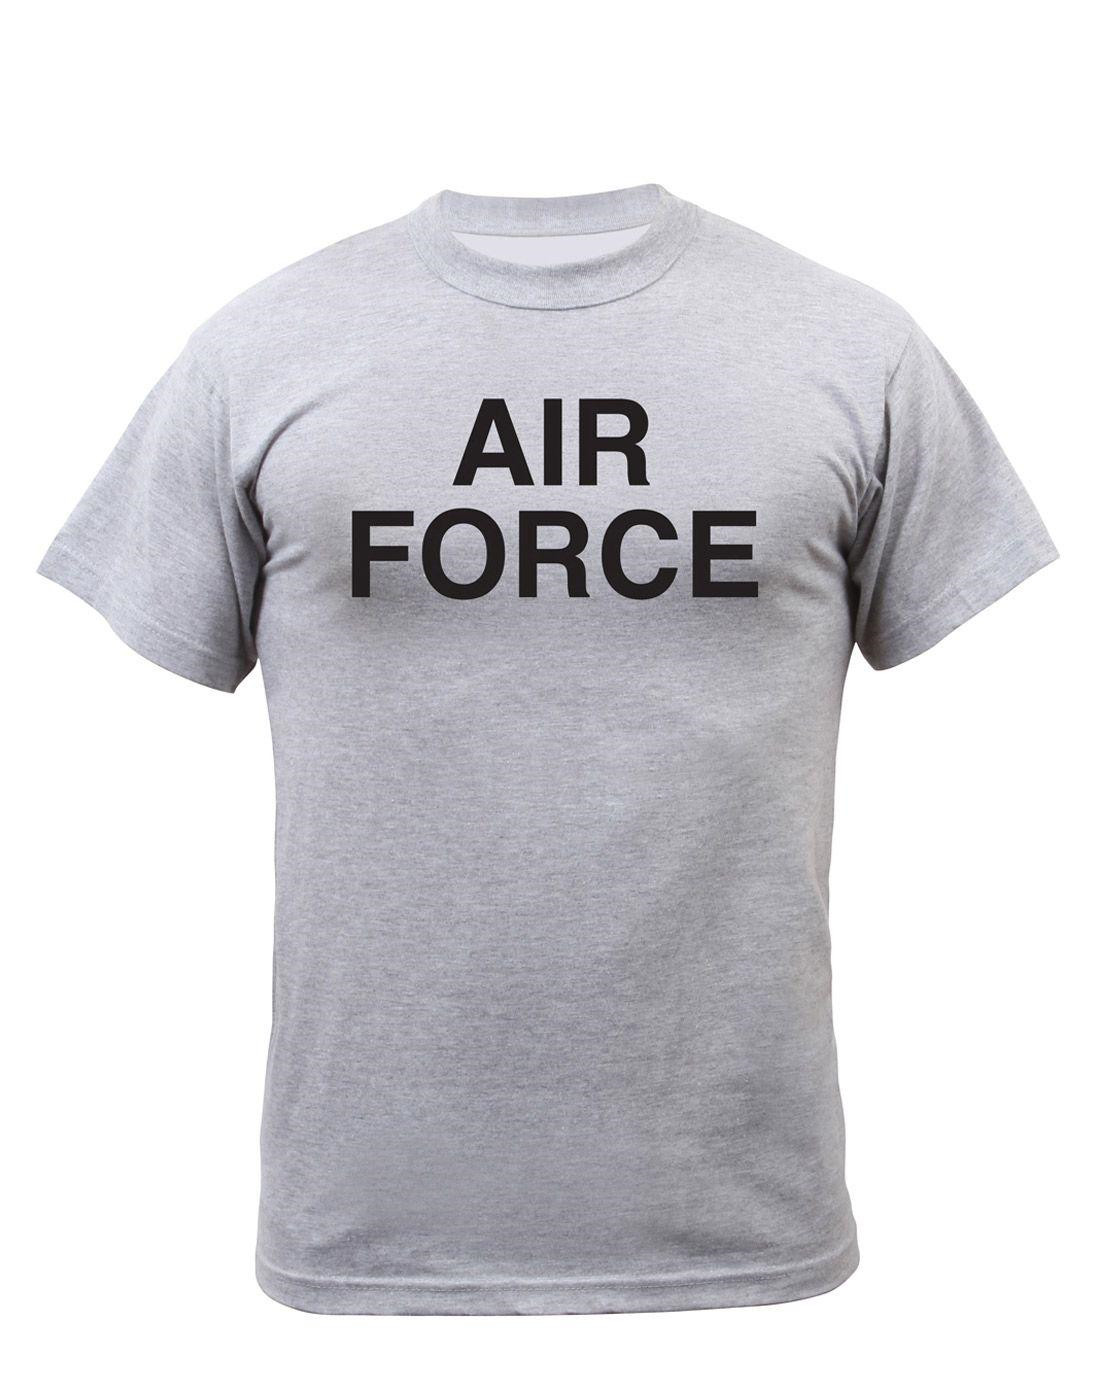 Billede af Rothco Physical Training T-shirt - 'ARMY' (Grå m. Air Force, S)